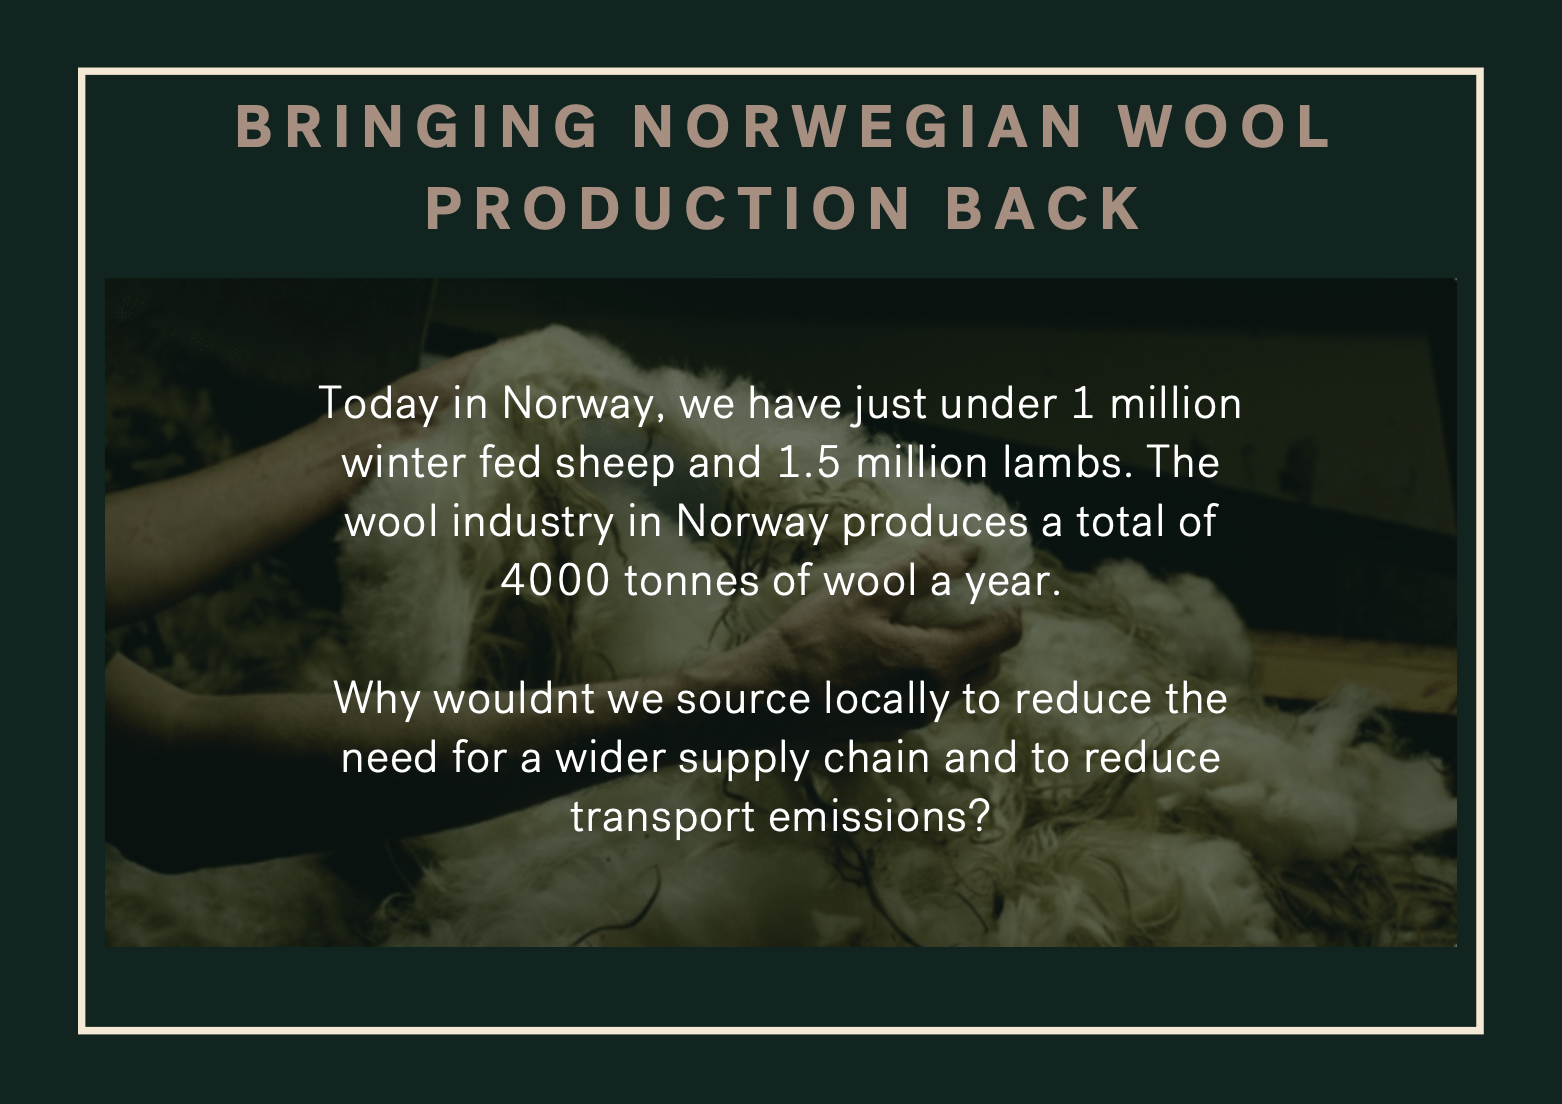 infographic on how flokk use norwegian wool in their fabric production to create sustainable office furniture